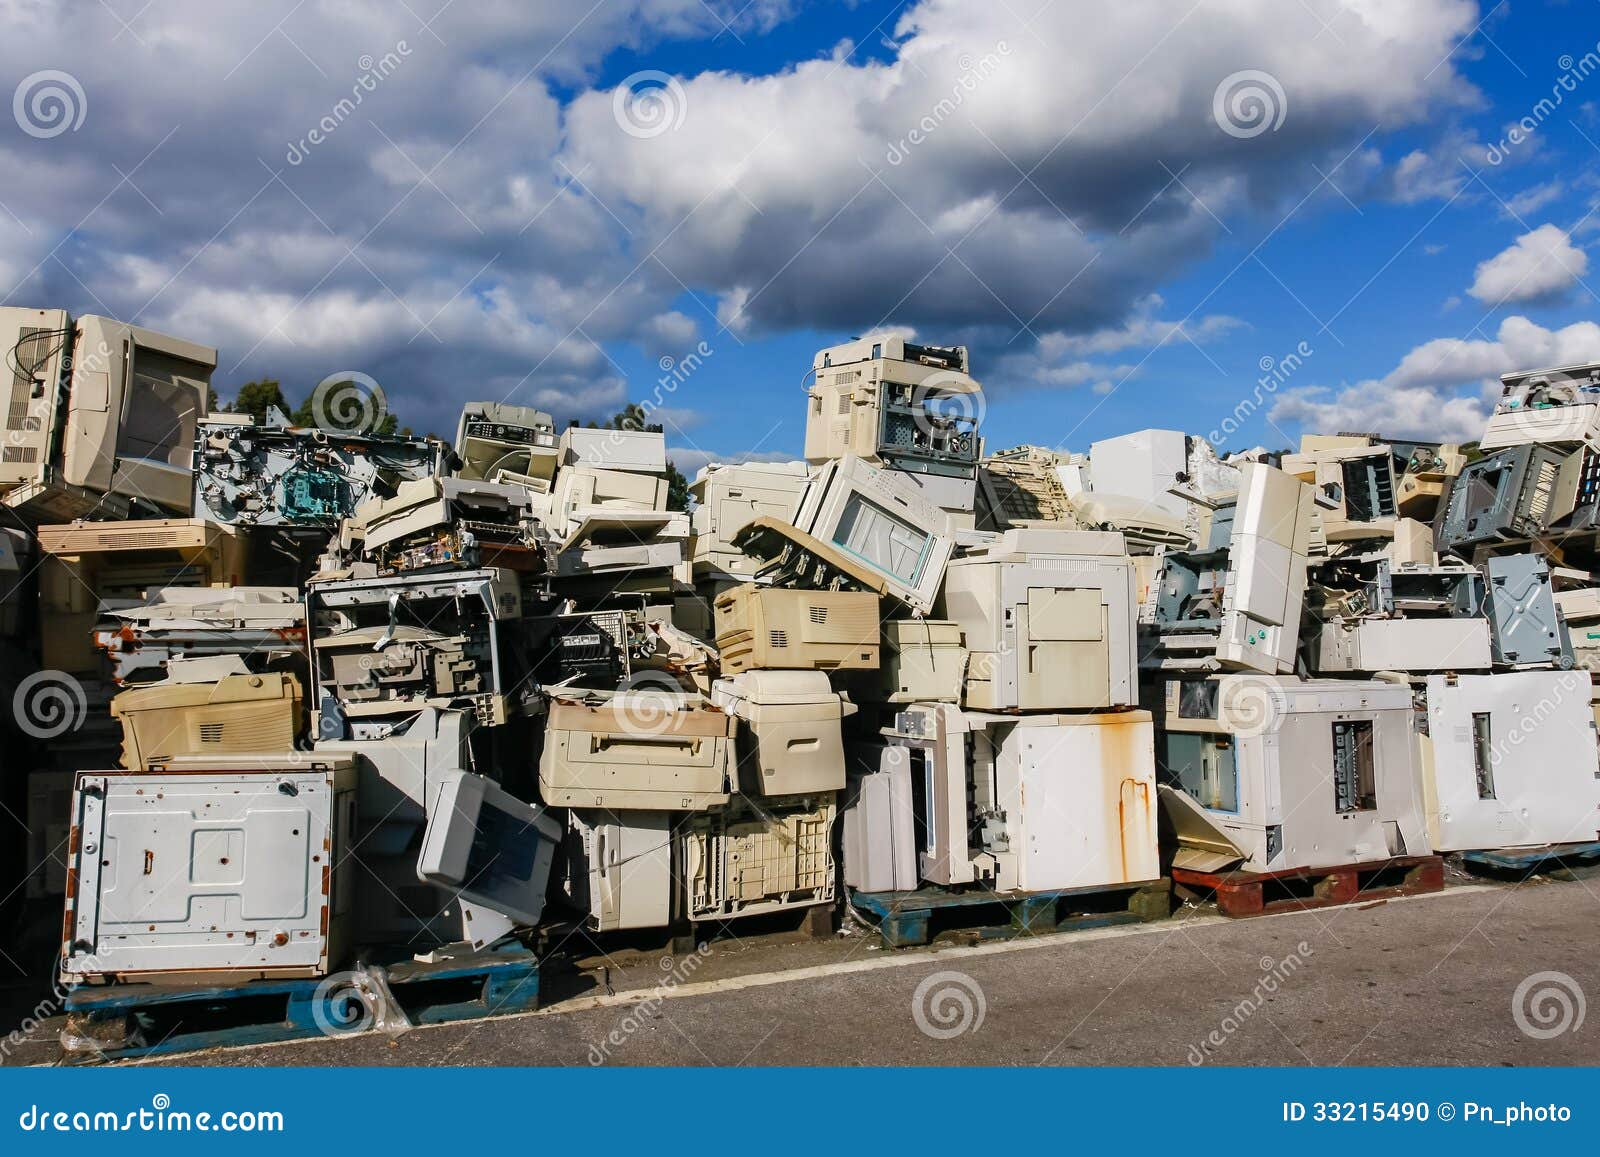 electronic waste for recycling